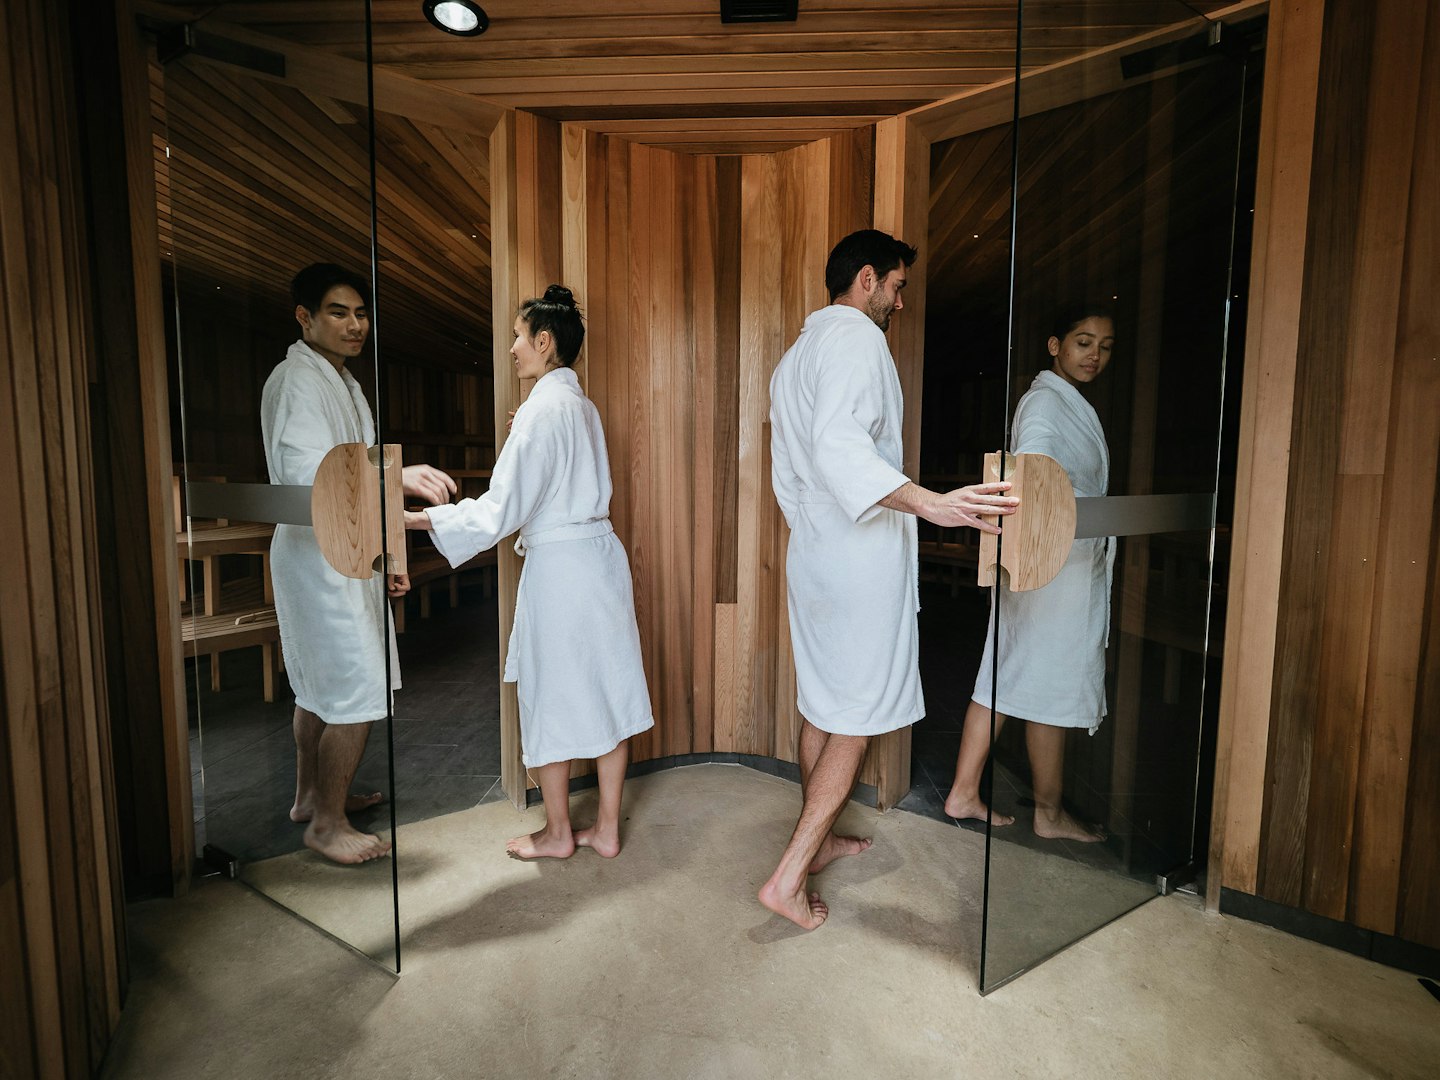 couples dressed in robes enter saunas